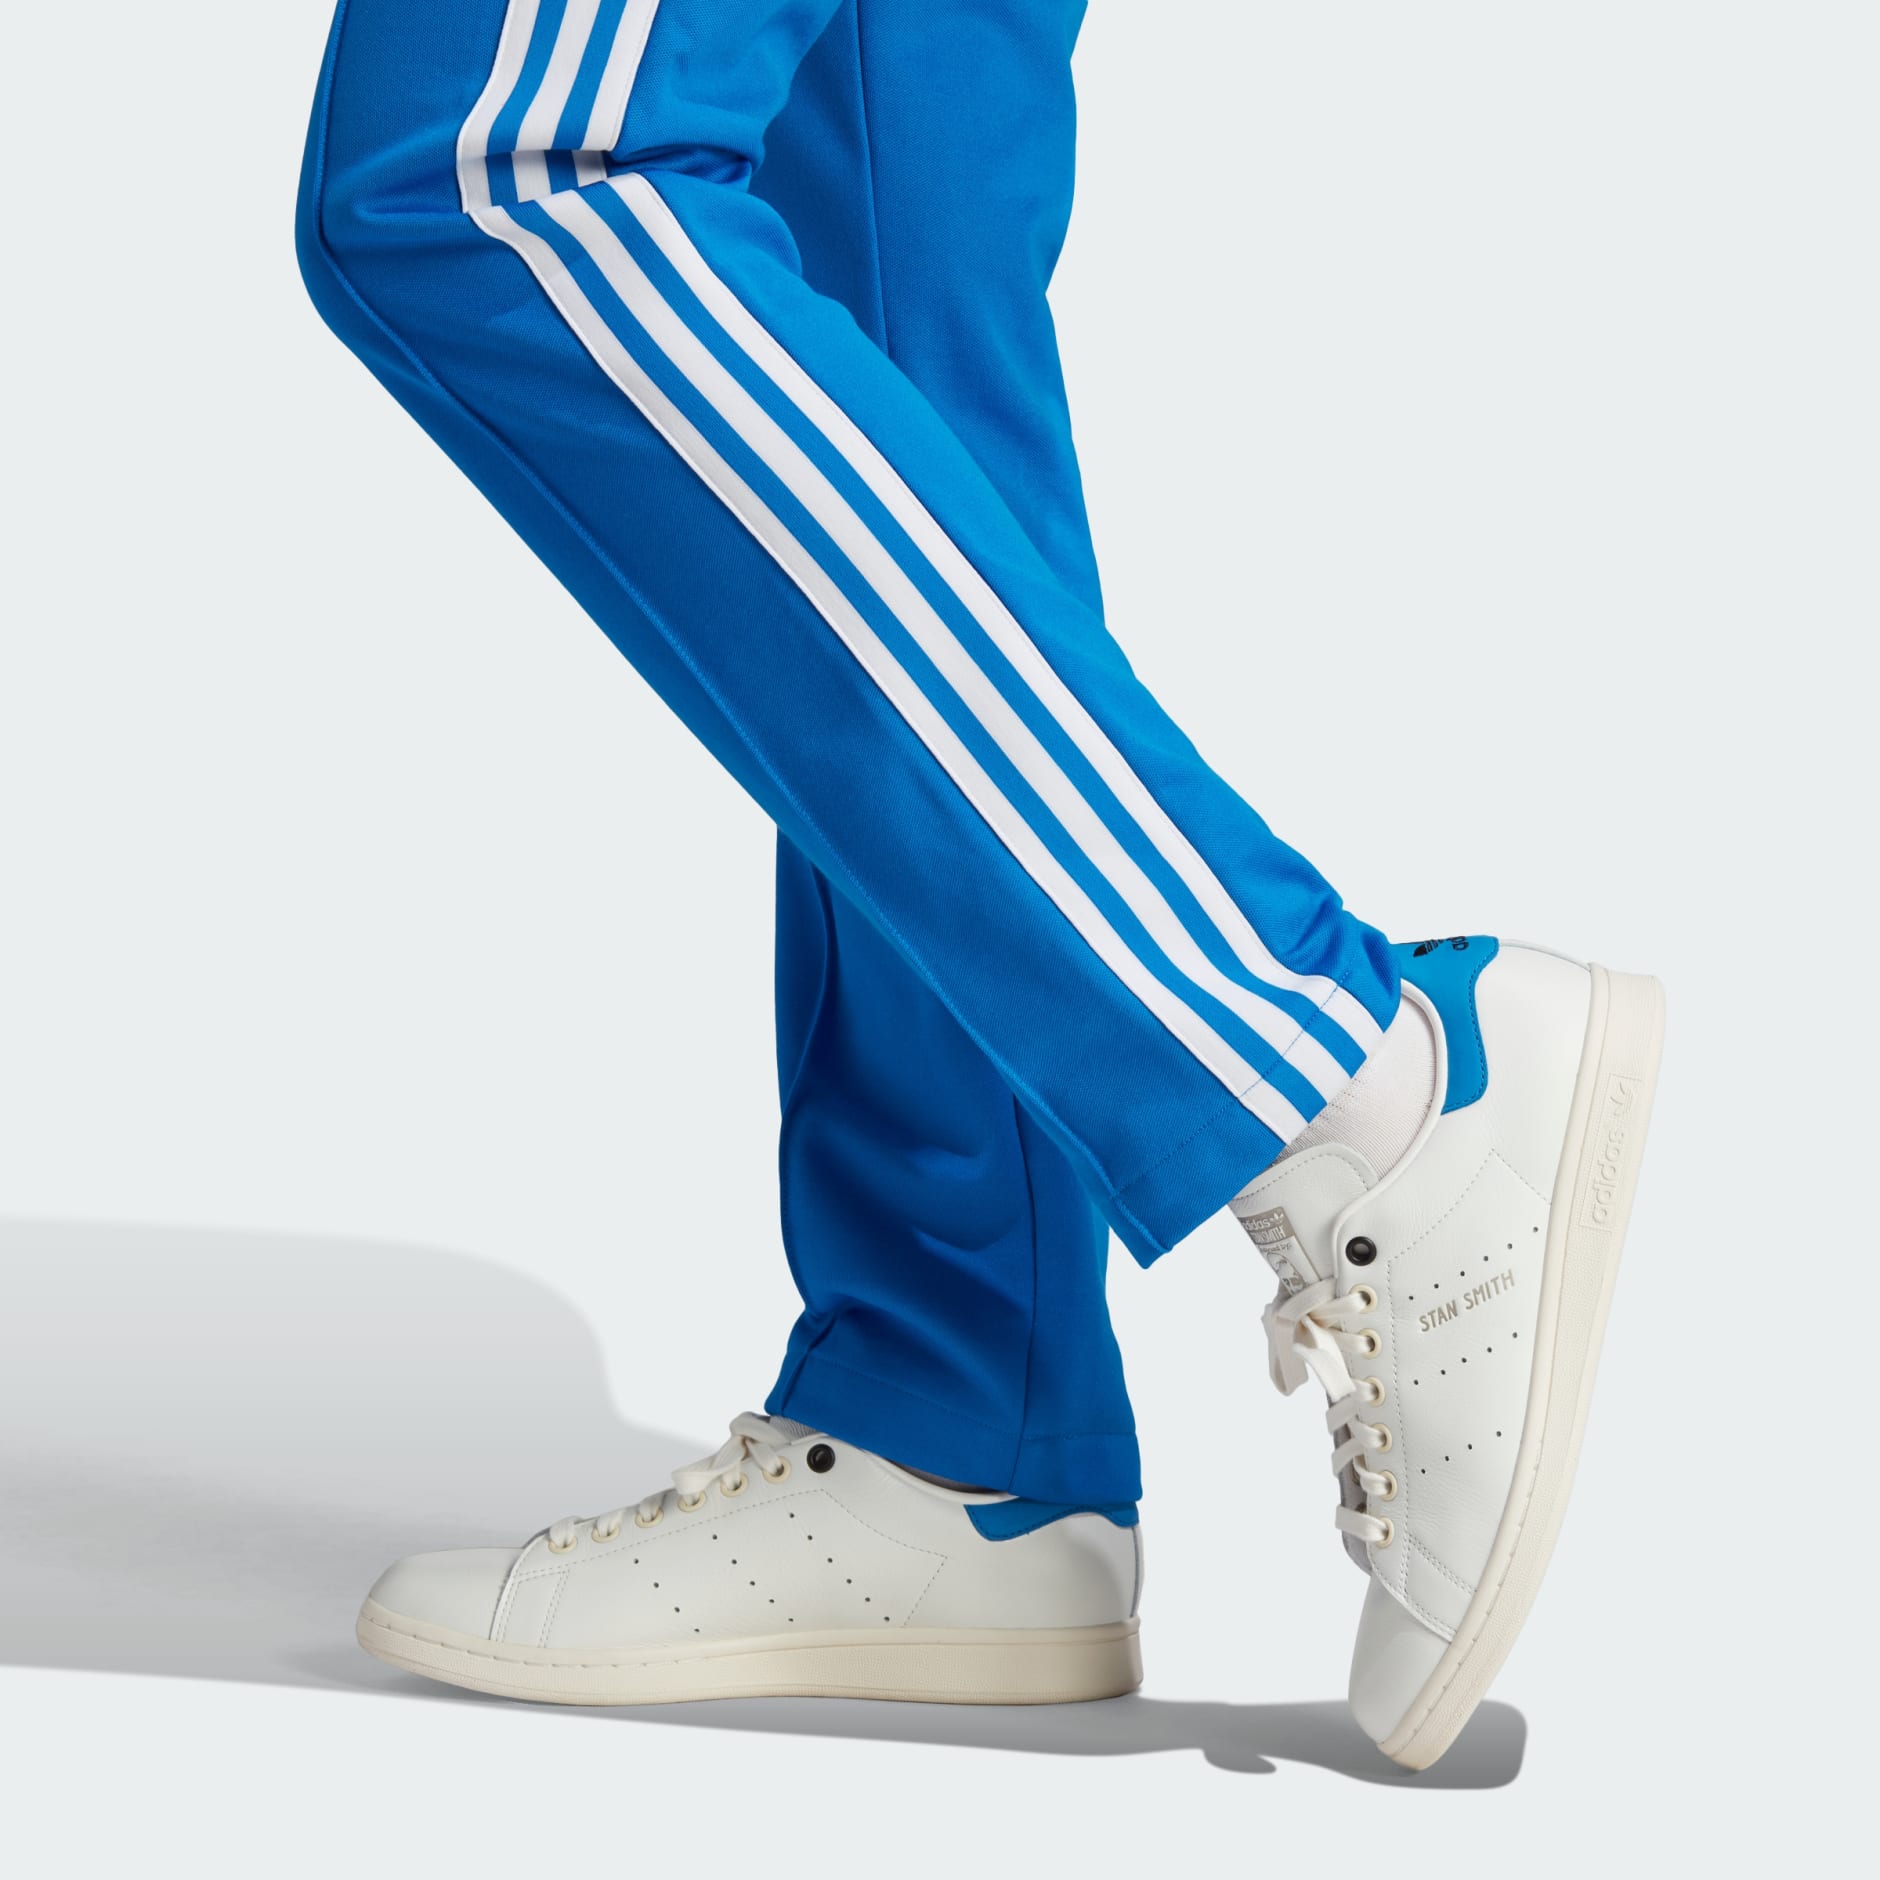 Women's Clothing - Blue Version Montreal Track Pants - Blue